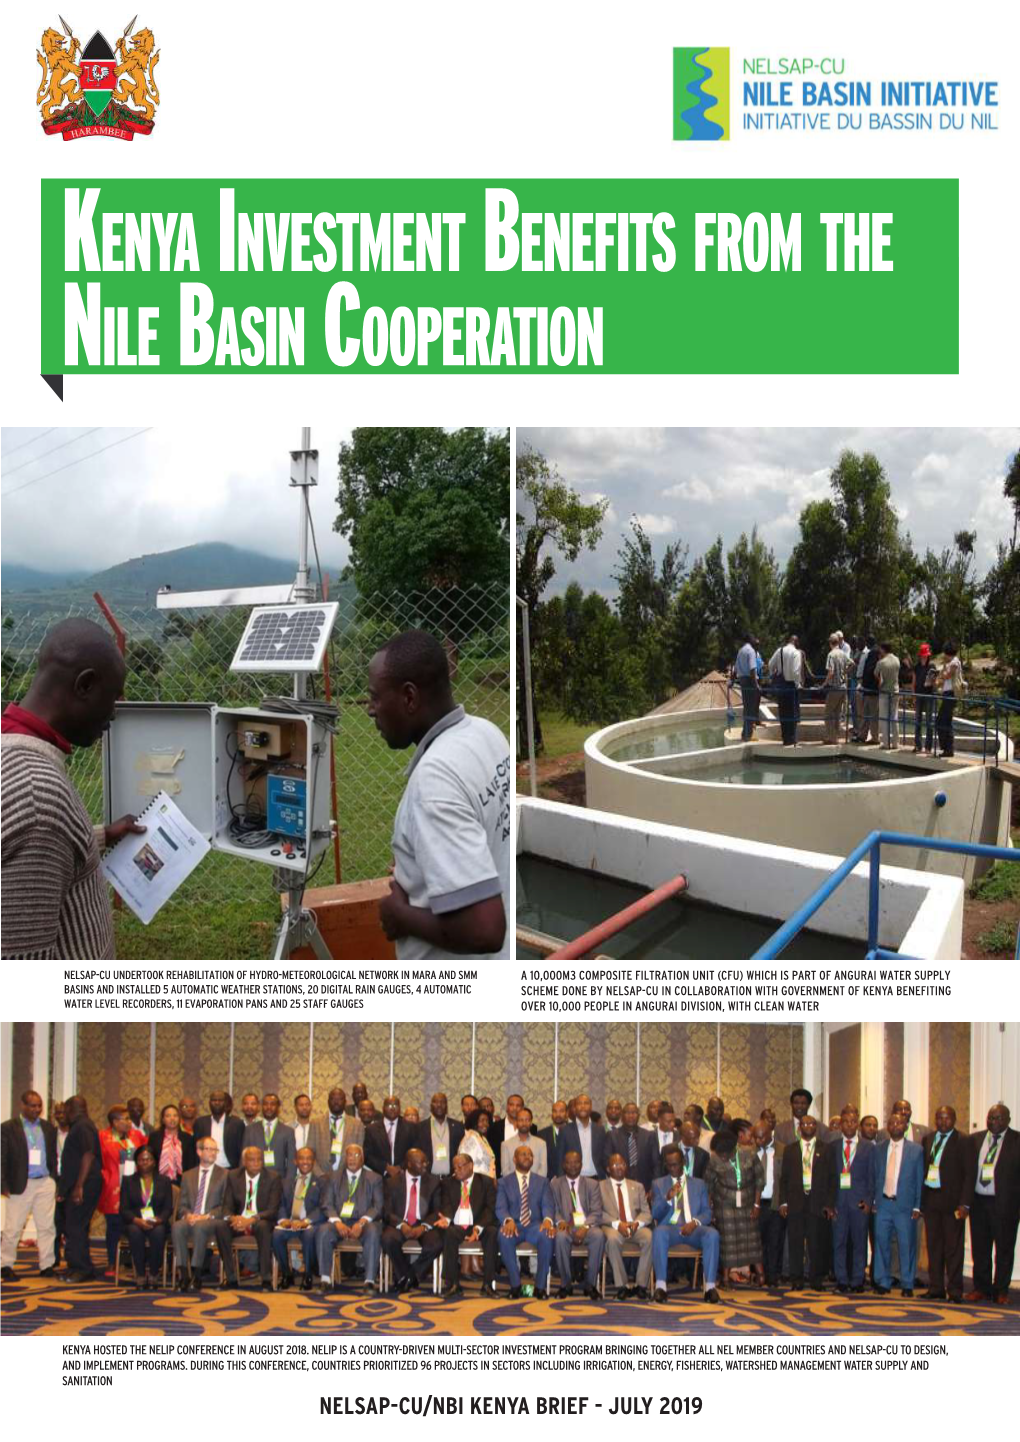 Kenya Investment Benefits from the Nile Basin Cooperation